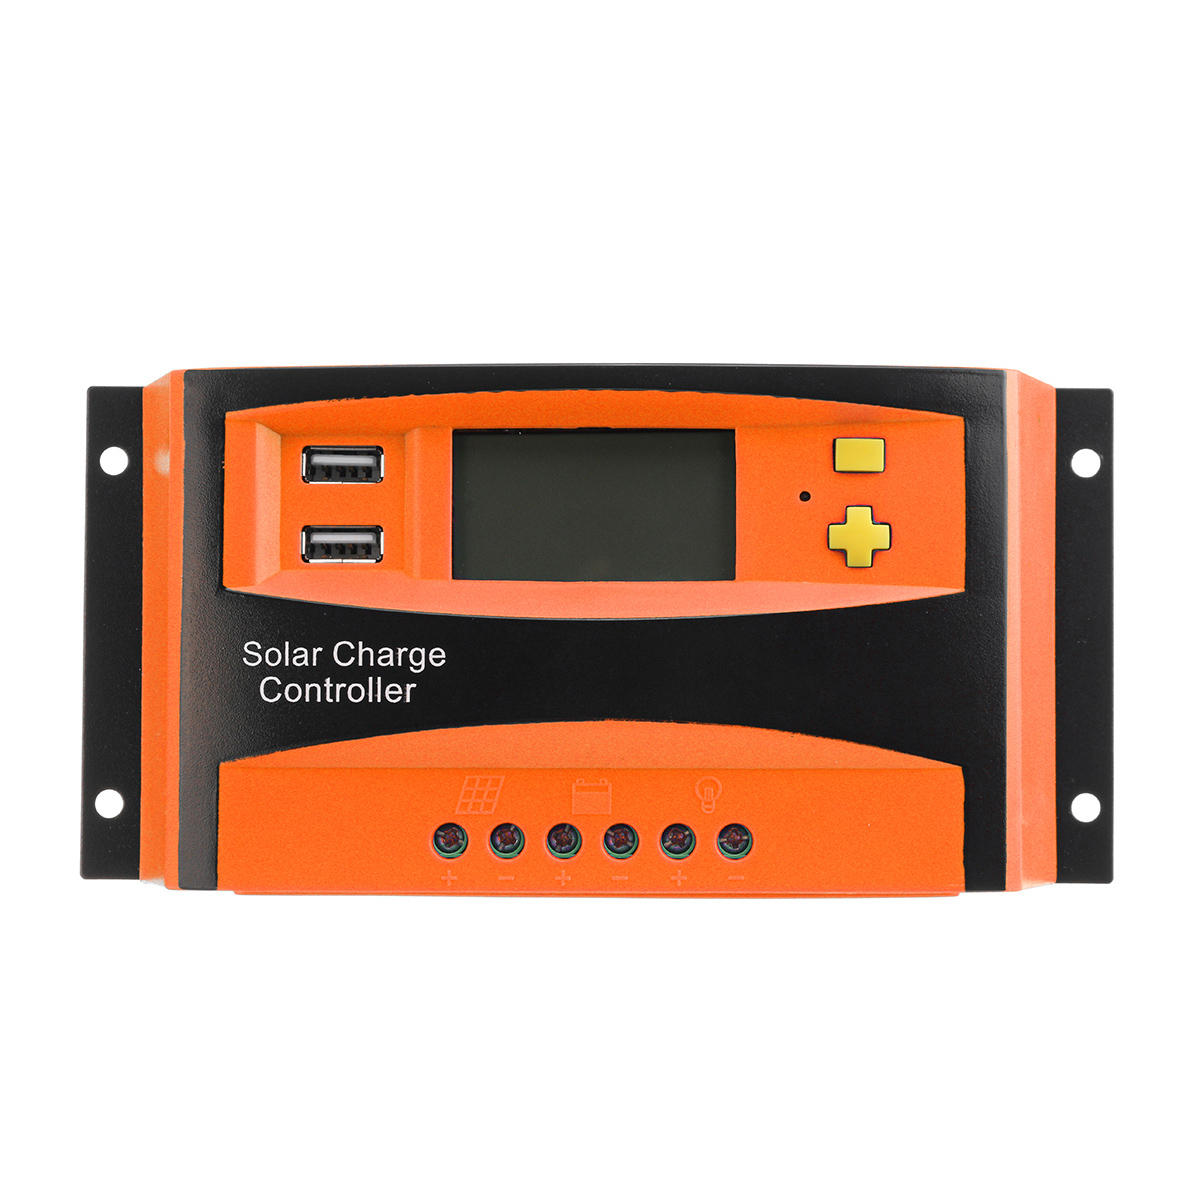 

12/24V AUTO 20A/30A/40A/50A/60A Solar Controller Support Dual USB Output & Over-Load Protection for Solar Panel Connecti